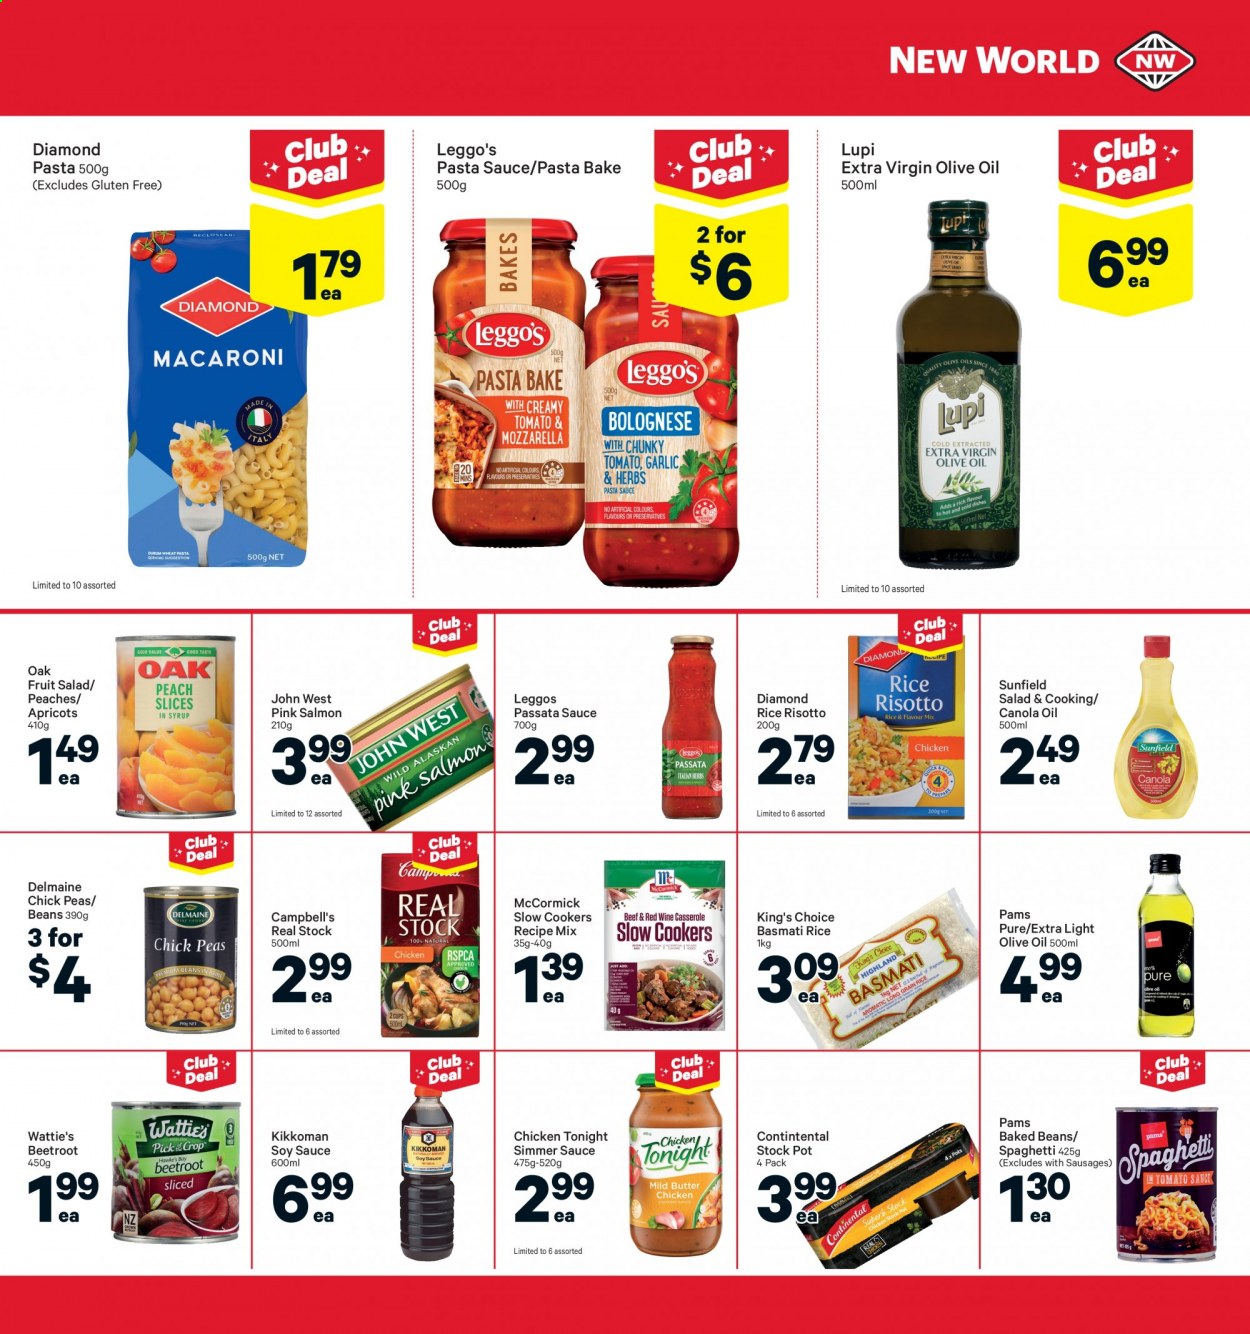 thumbnail - New World mailer - 17.05.2021 - 23.05.2021 - Sales products - beans, apricots, peaches, salmon, Campbell's, risotto, spaghetti, pasta sauce, sauce, Wattie's, Delmaine, sausage, baked beans, fruit salad, basmati rice, rice, soy sauce, Kikkoman, stockpot, canola oil, extra virgin olive oil, olive oil, oil. Page 17.